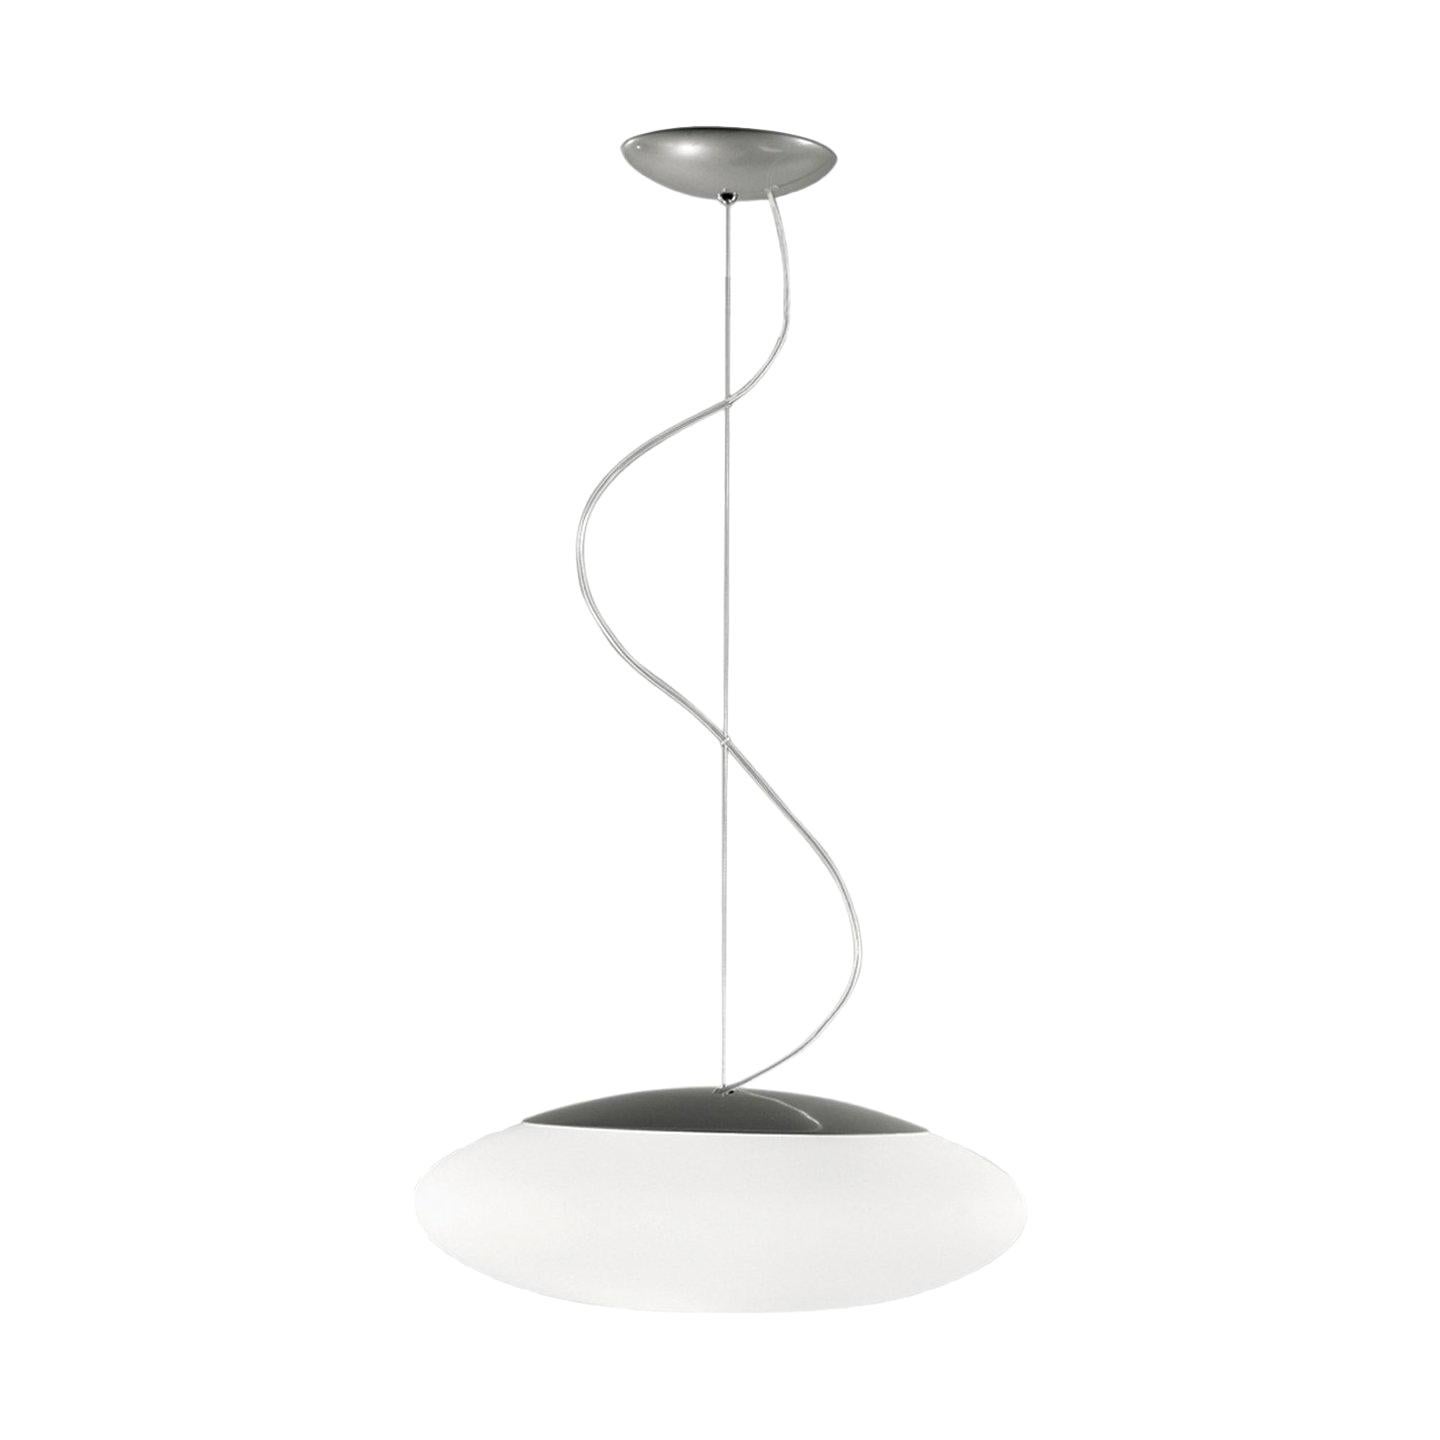 Leucos Felix S 47 Pendant Light in Satin White and Gray by Design Lab For Sale